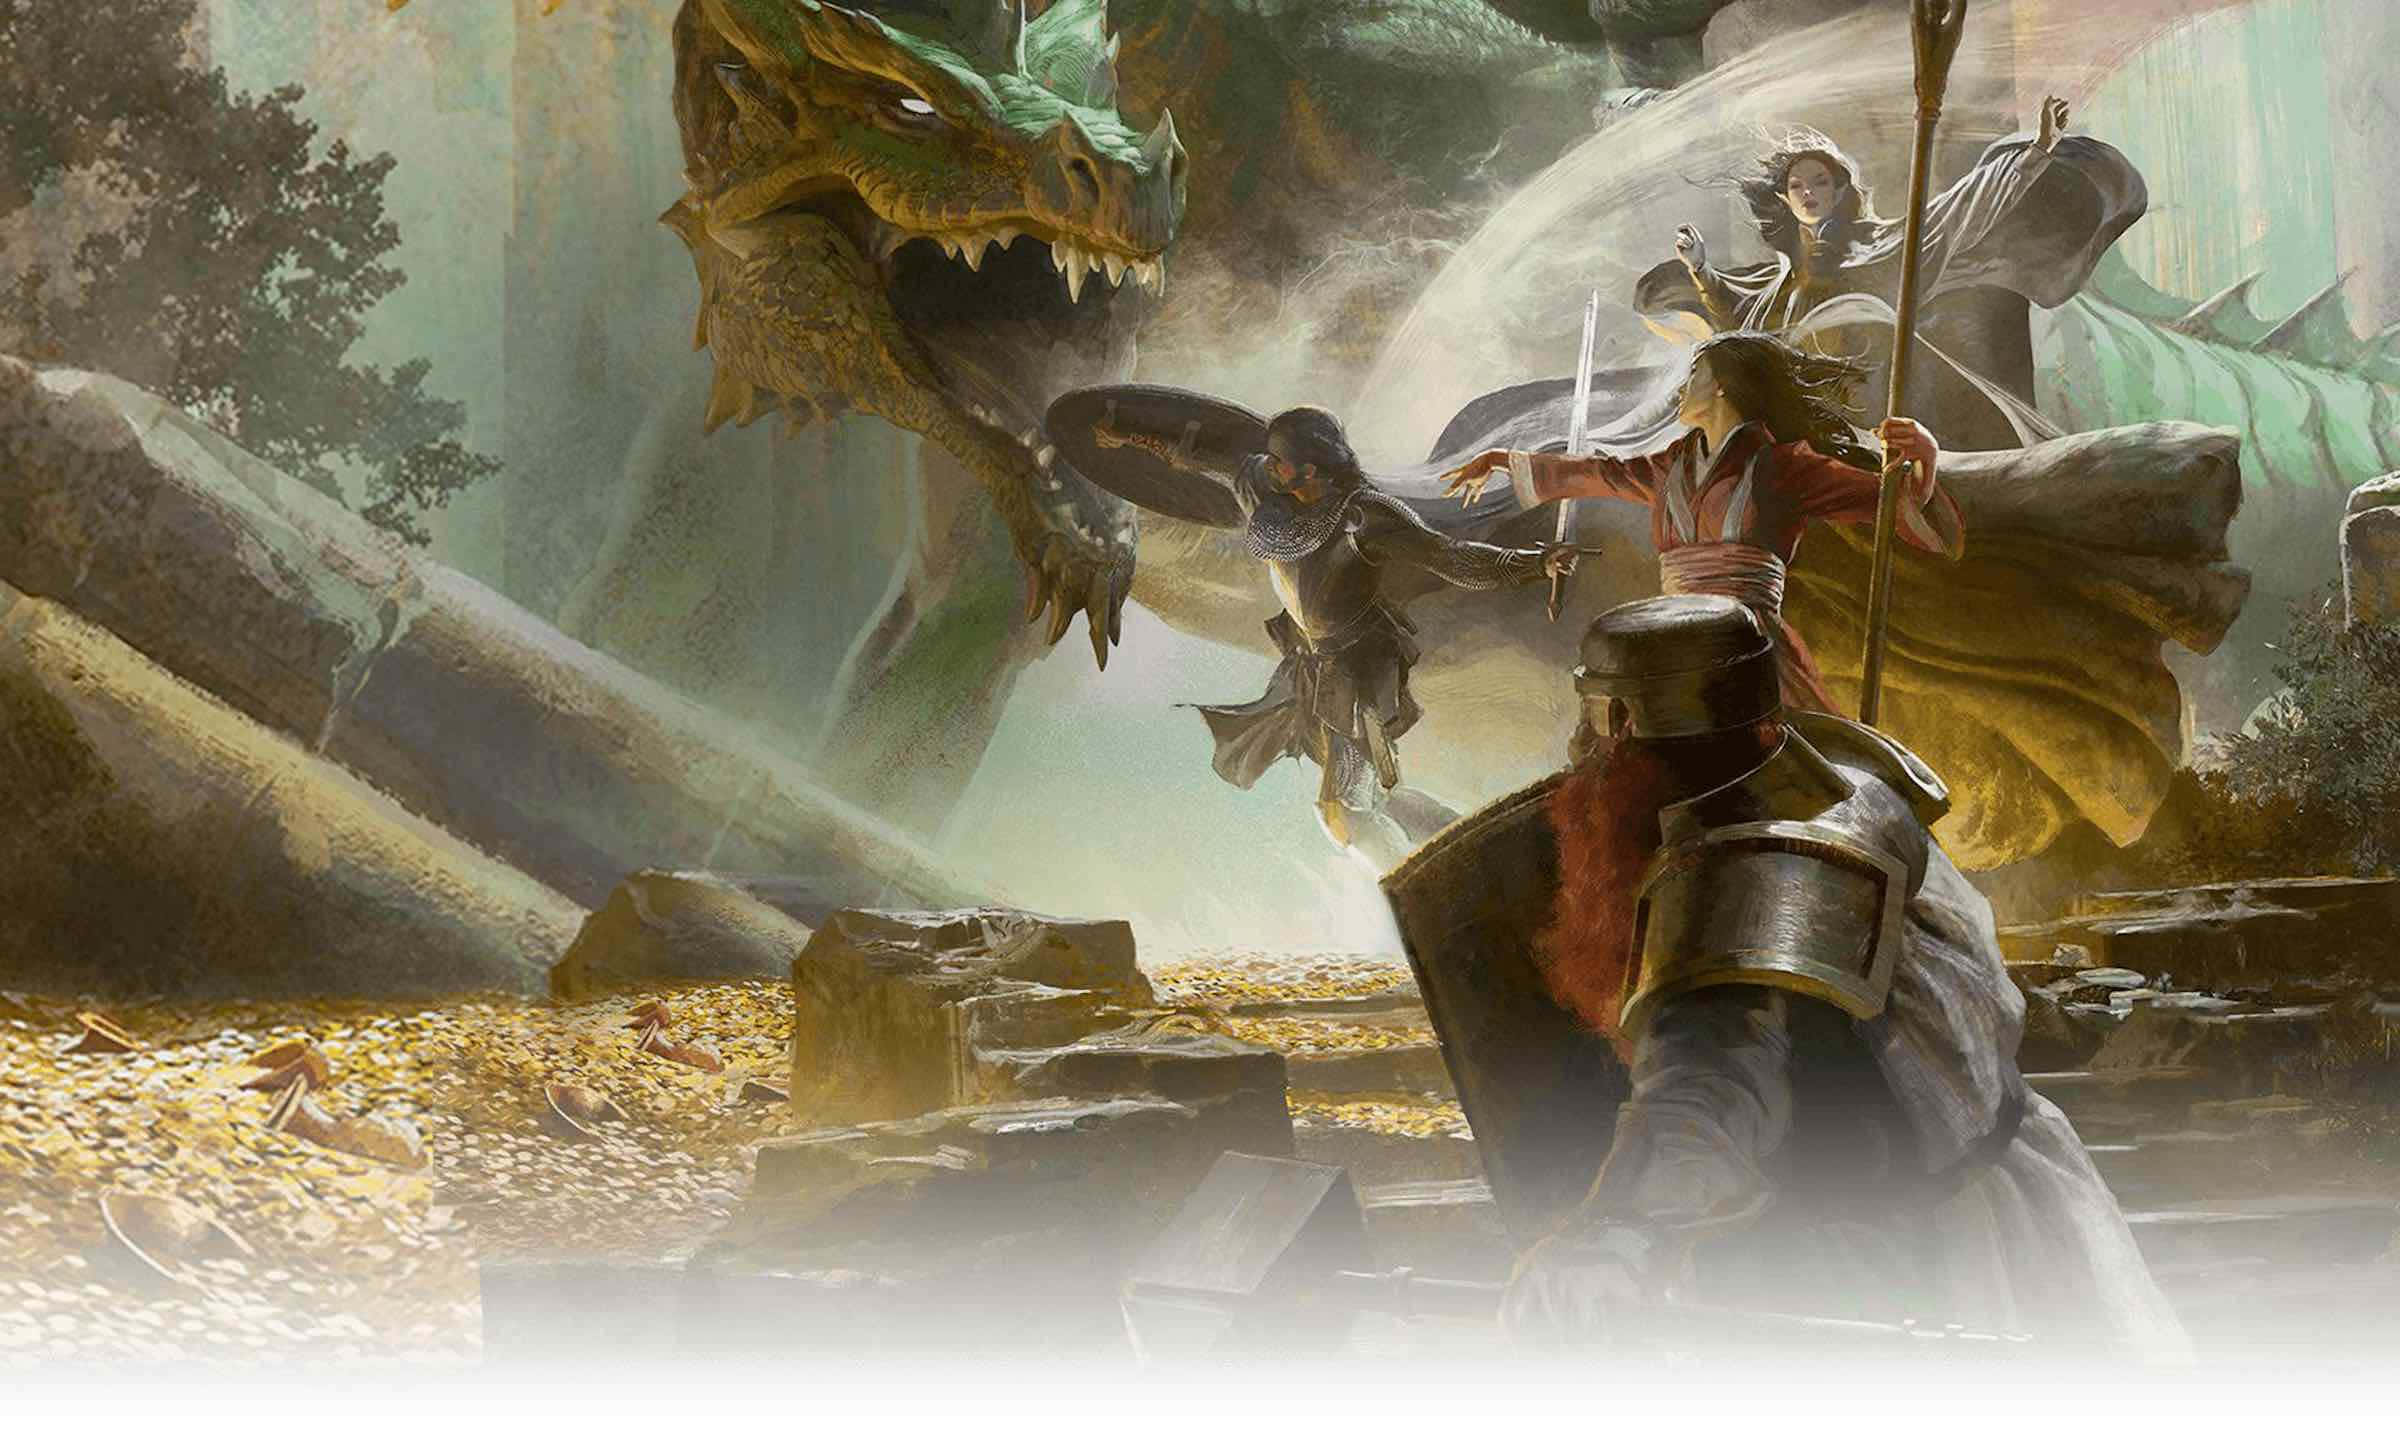 Dare to explore the dungeons of Dungeons&Dragons!